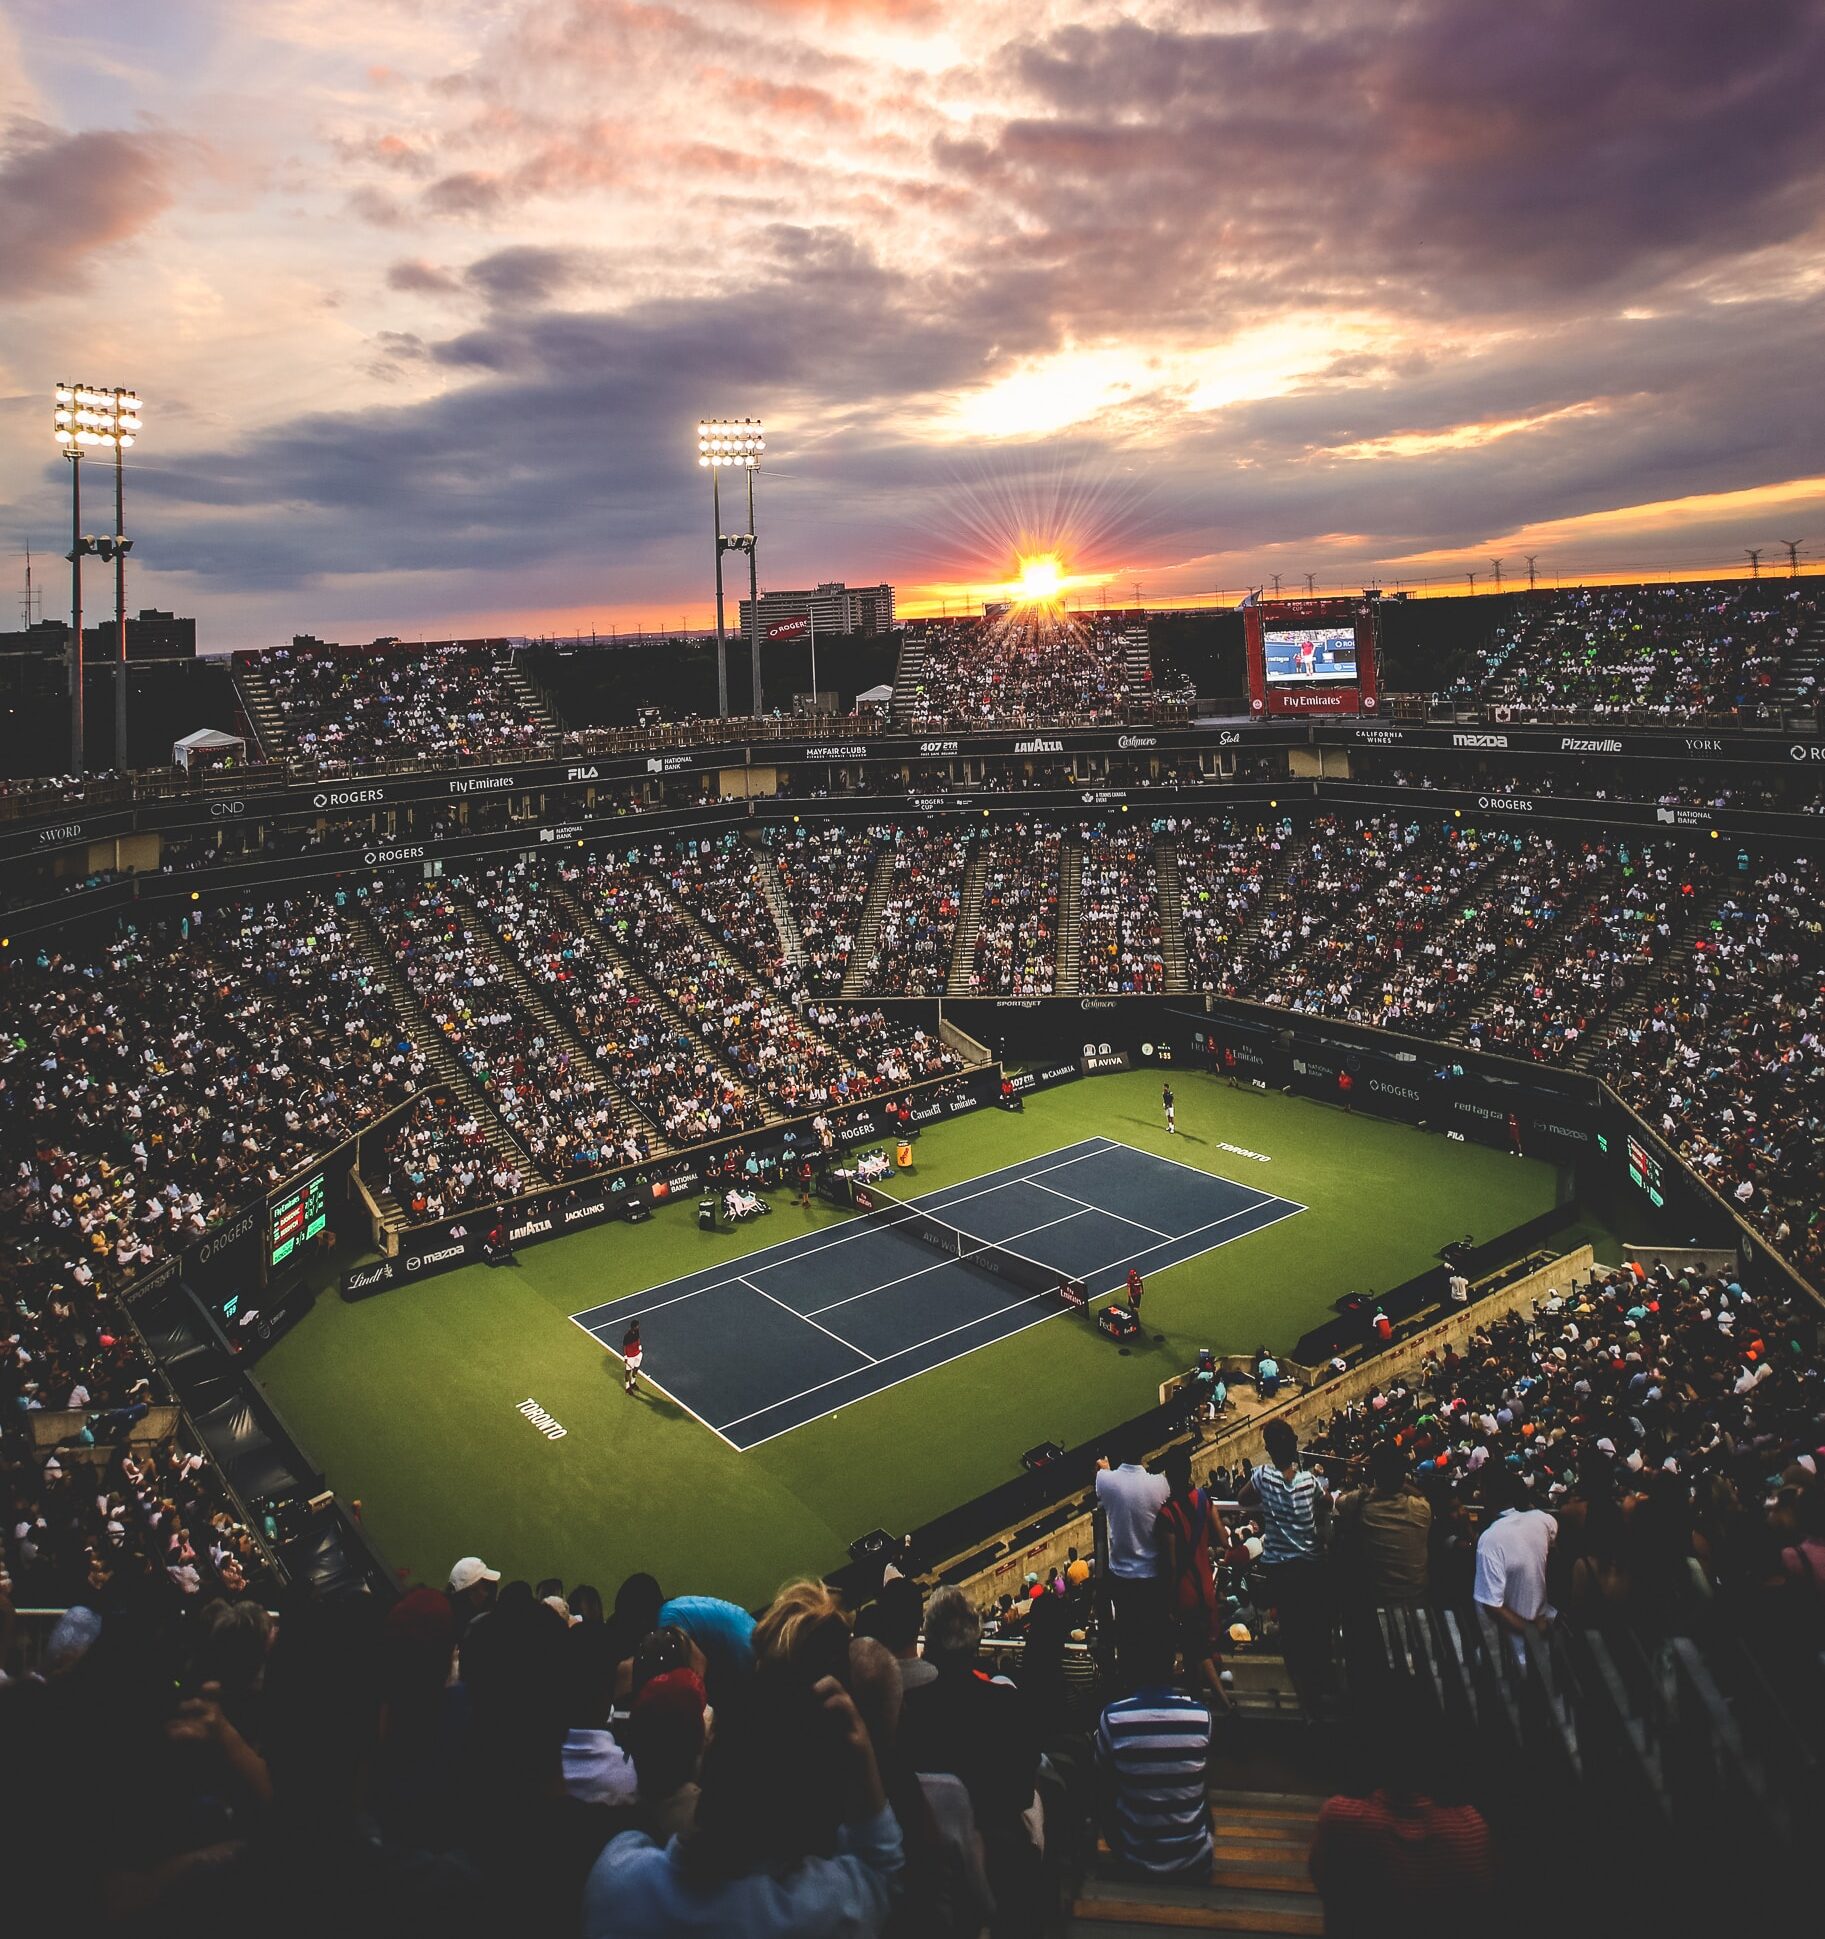 Tennis stadion filled with fans